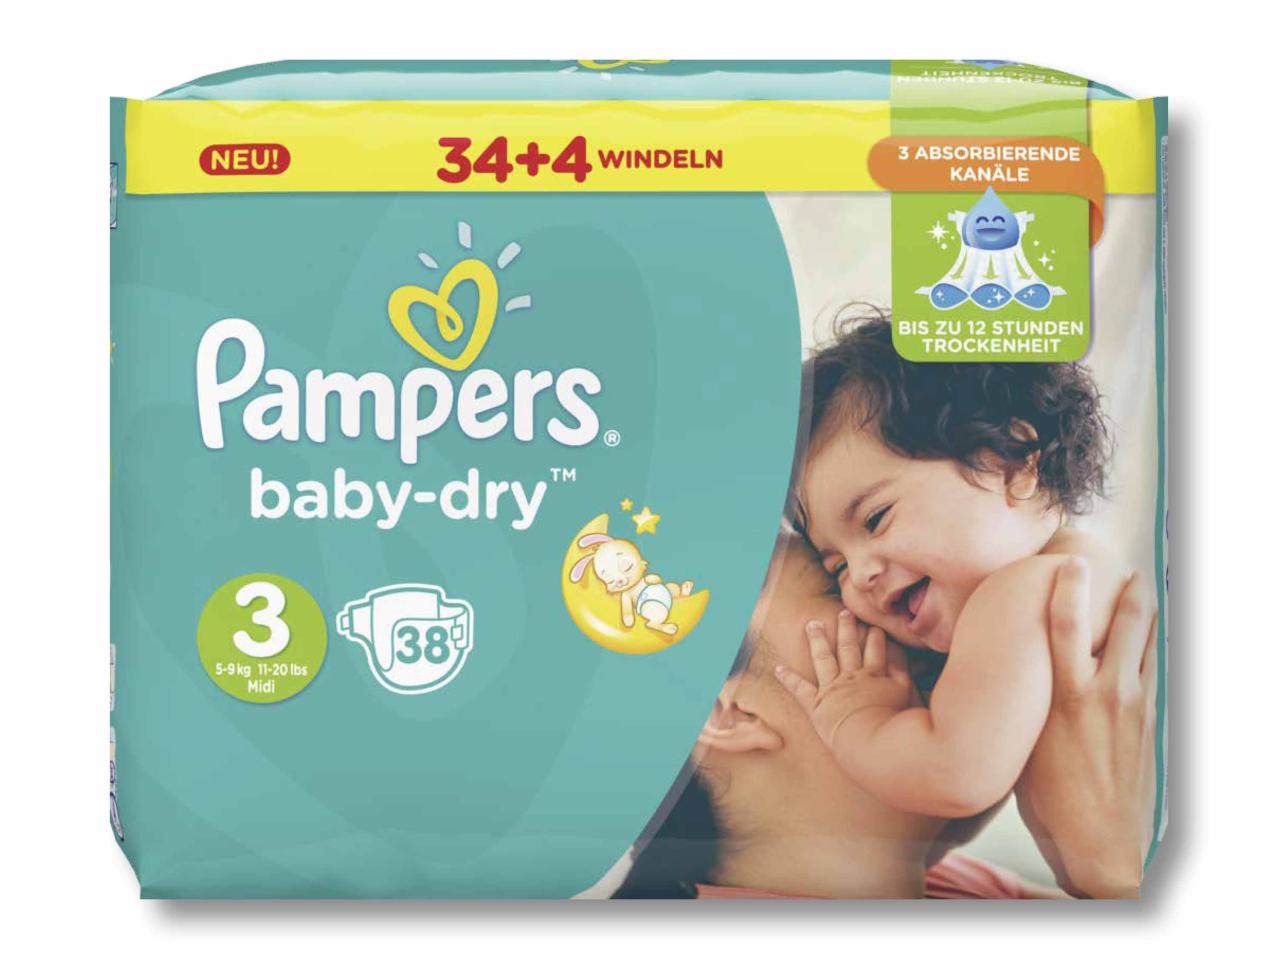 Pampers Windeln Baby-dry